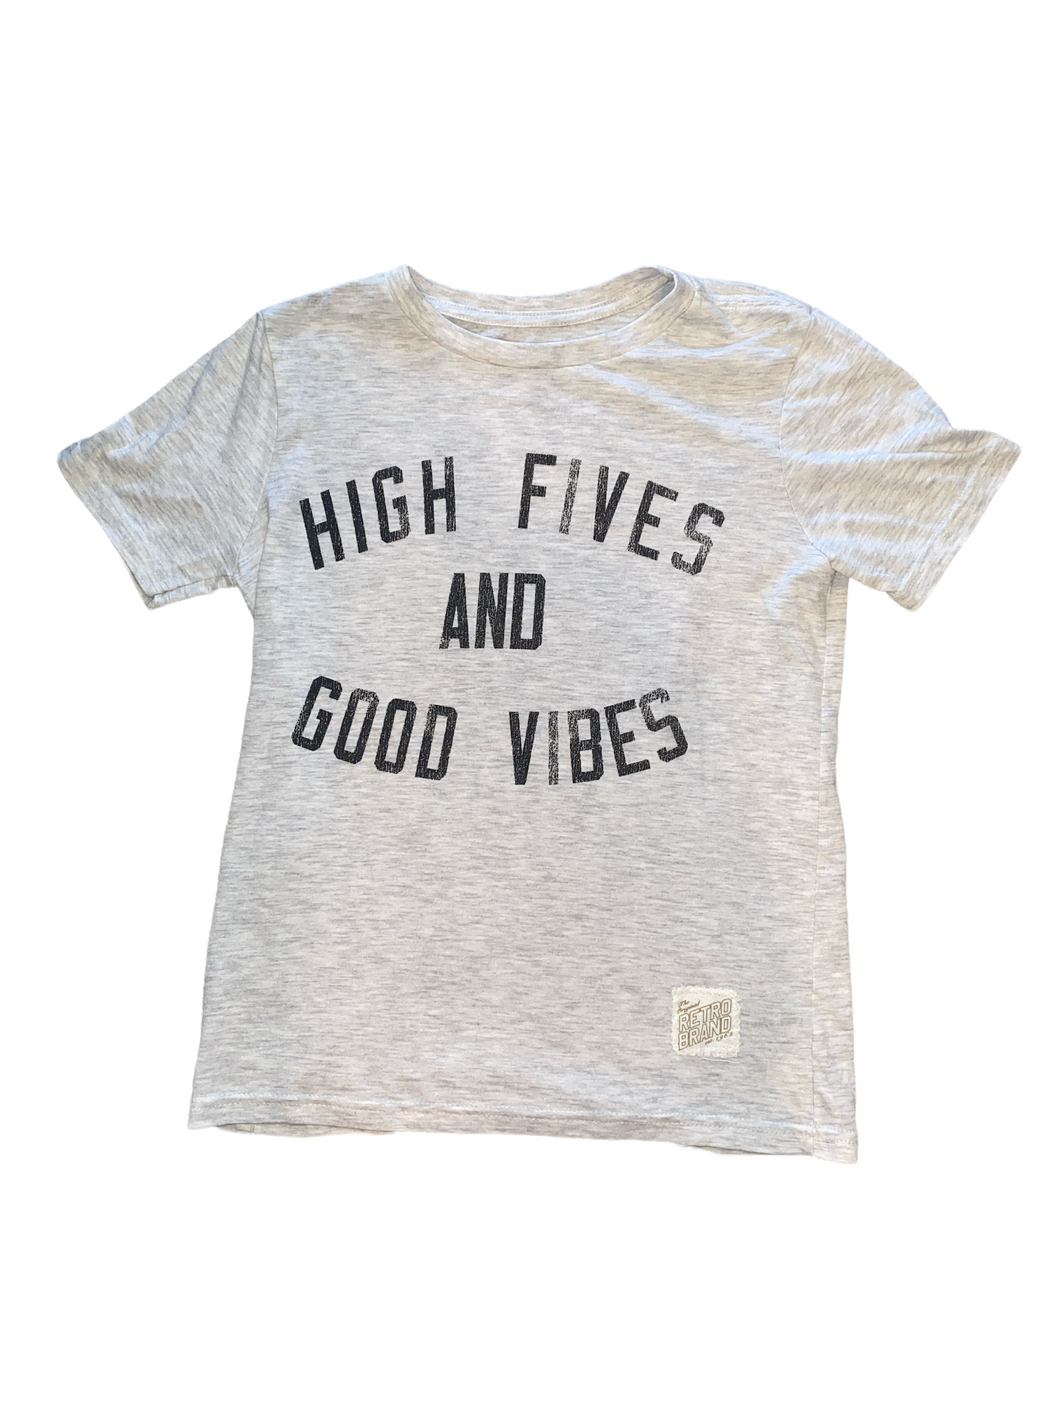 RetroBrand boys High Fives and Good Vibes tee Youth M (10-12)